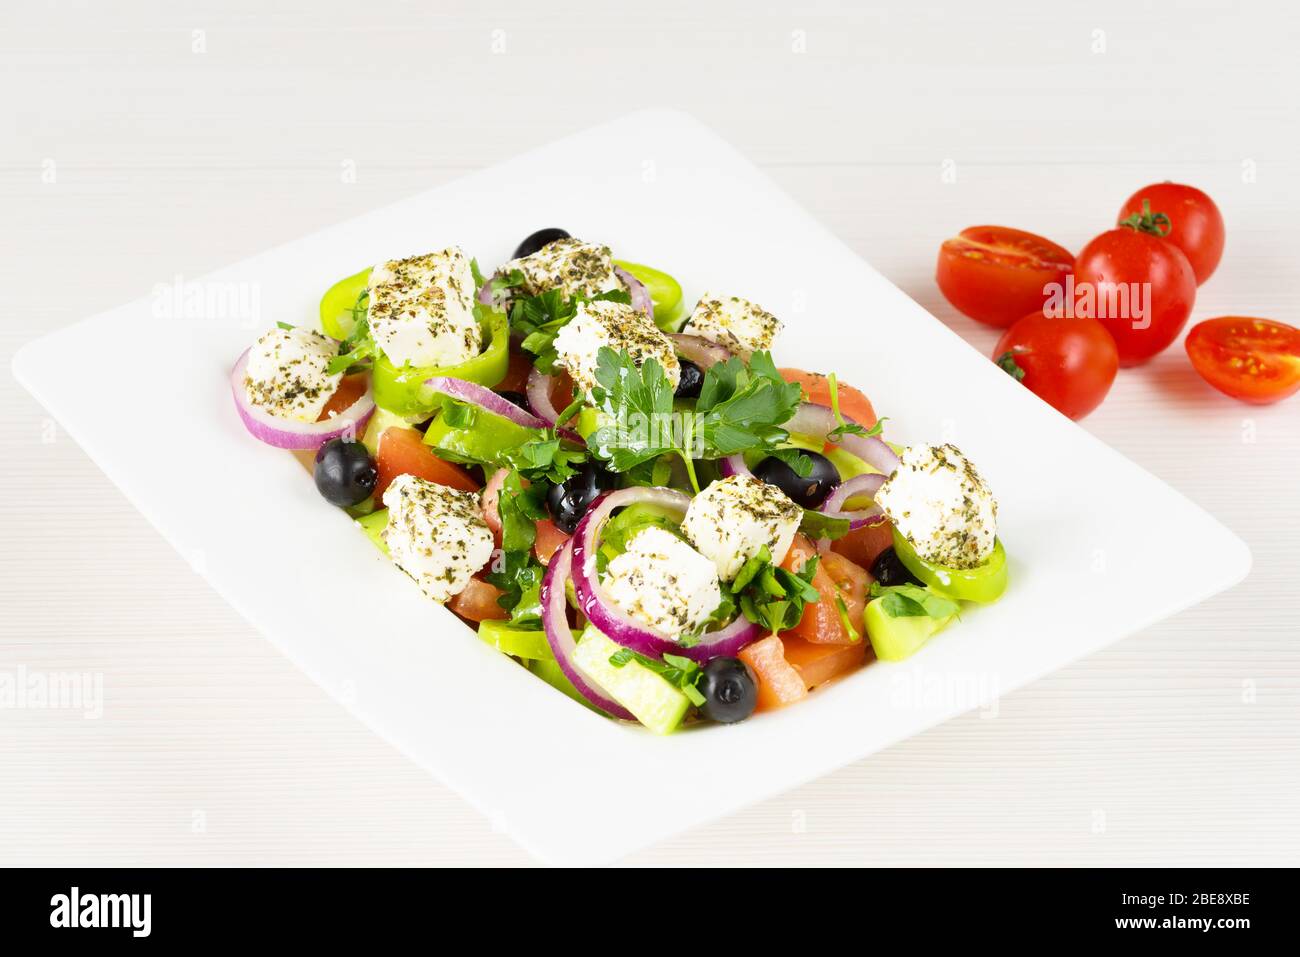 Greek salad with fresh tomato, cucumber, red onion, basil, feta cheese, black olives, Italian herbs and olive oil in white dish on white wooden table. Stock Photo